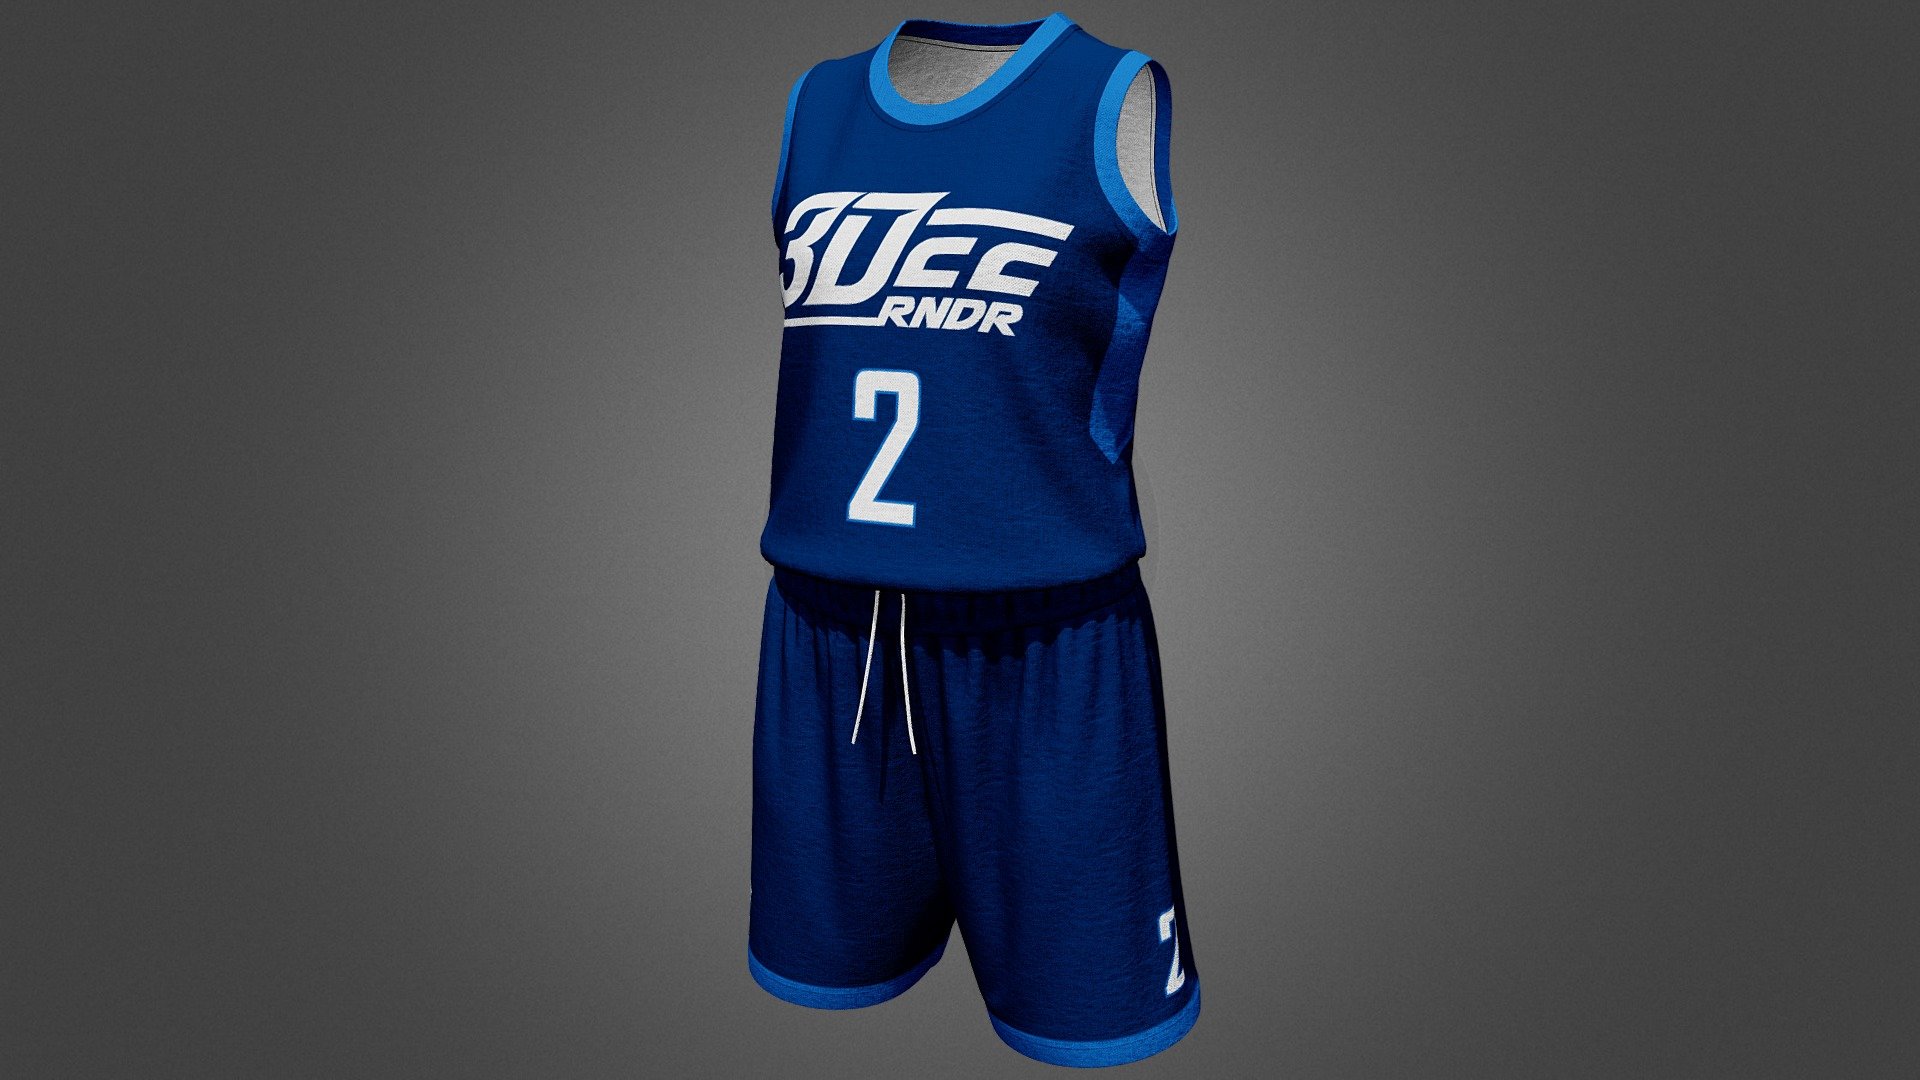 Women's Basketball Jersey Mockup - Half Side View - Free Download Images  High Quality PNG, JPG